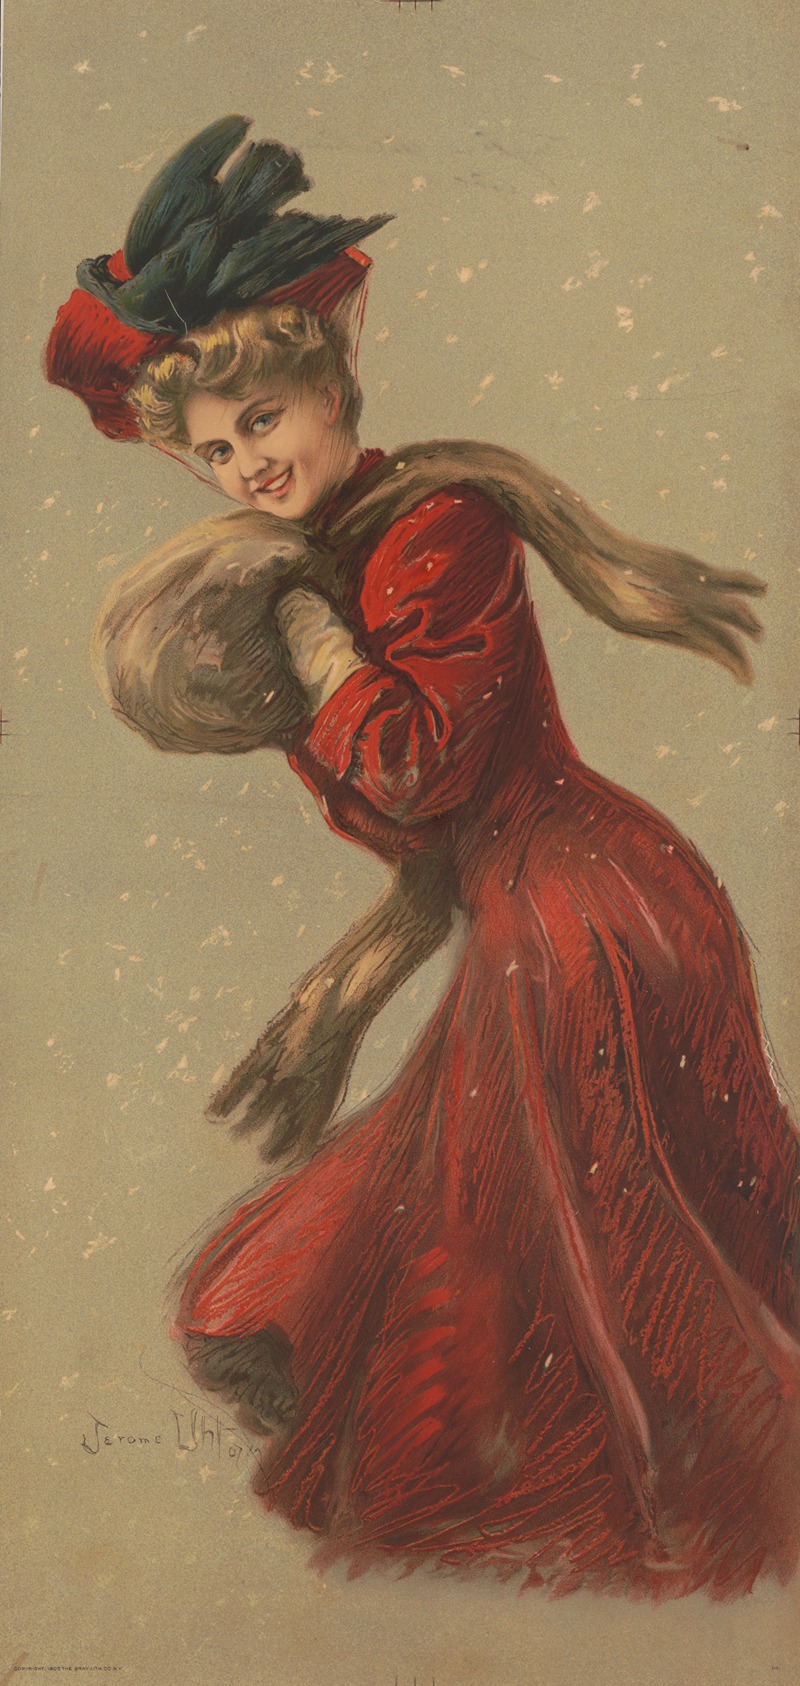 Gray Litho. Co - Woman wearing red coat and hat with fur muffler in the snow